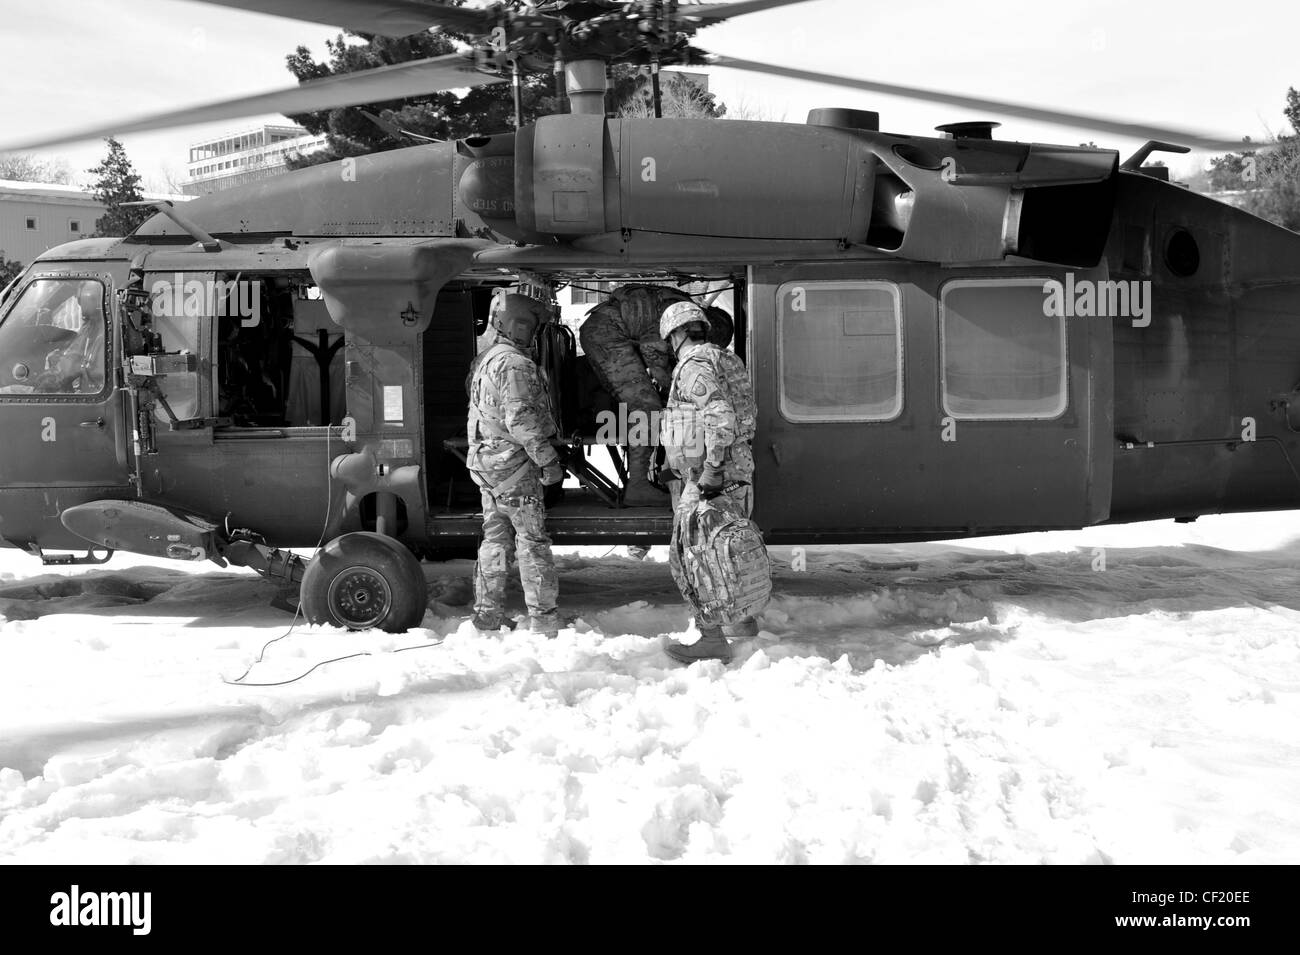 A UH-60 Black Hawk crew member assigned to A Company, 3-82 Aviation Task Force Talon at Bagram Army Air Field, helps service members unload baggage after landing in Kabul, Afghanistan, Feb. 25, 2012. The unit conducts battlefield circulation missions for Combined Joint Task Force-1, Task Force Poseidon, and Task Force Talon. The UH-60 Black Hawk has been in use since the late 1970s and continues to be one of the militaryâ€™s most versatile and reliable utility tactical transport helicopter. Stock Photo